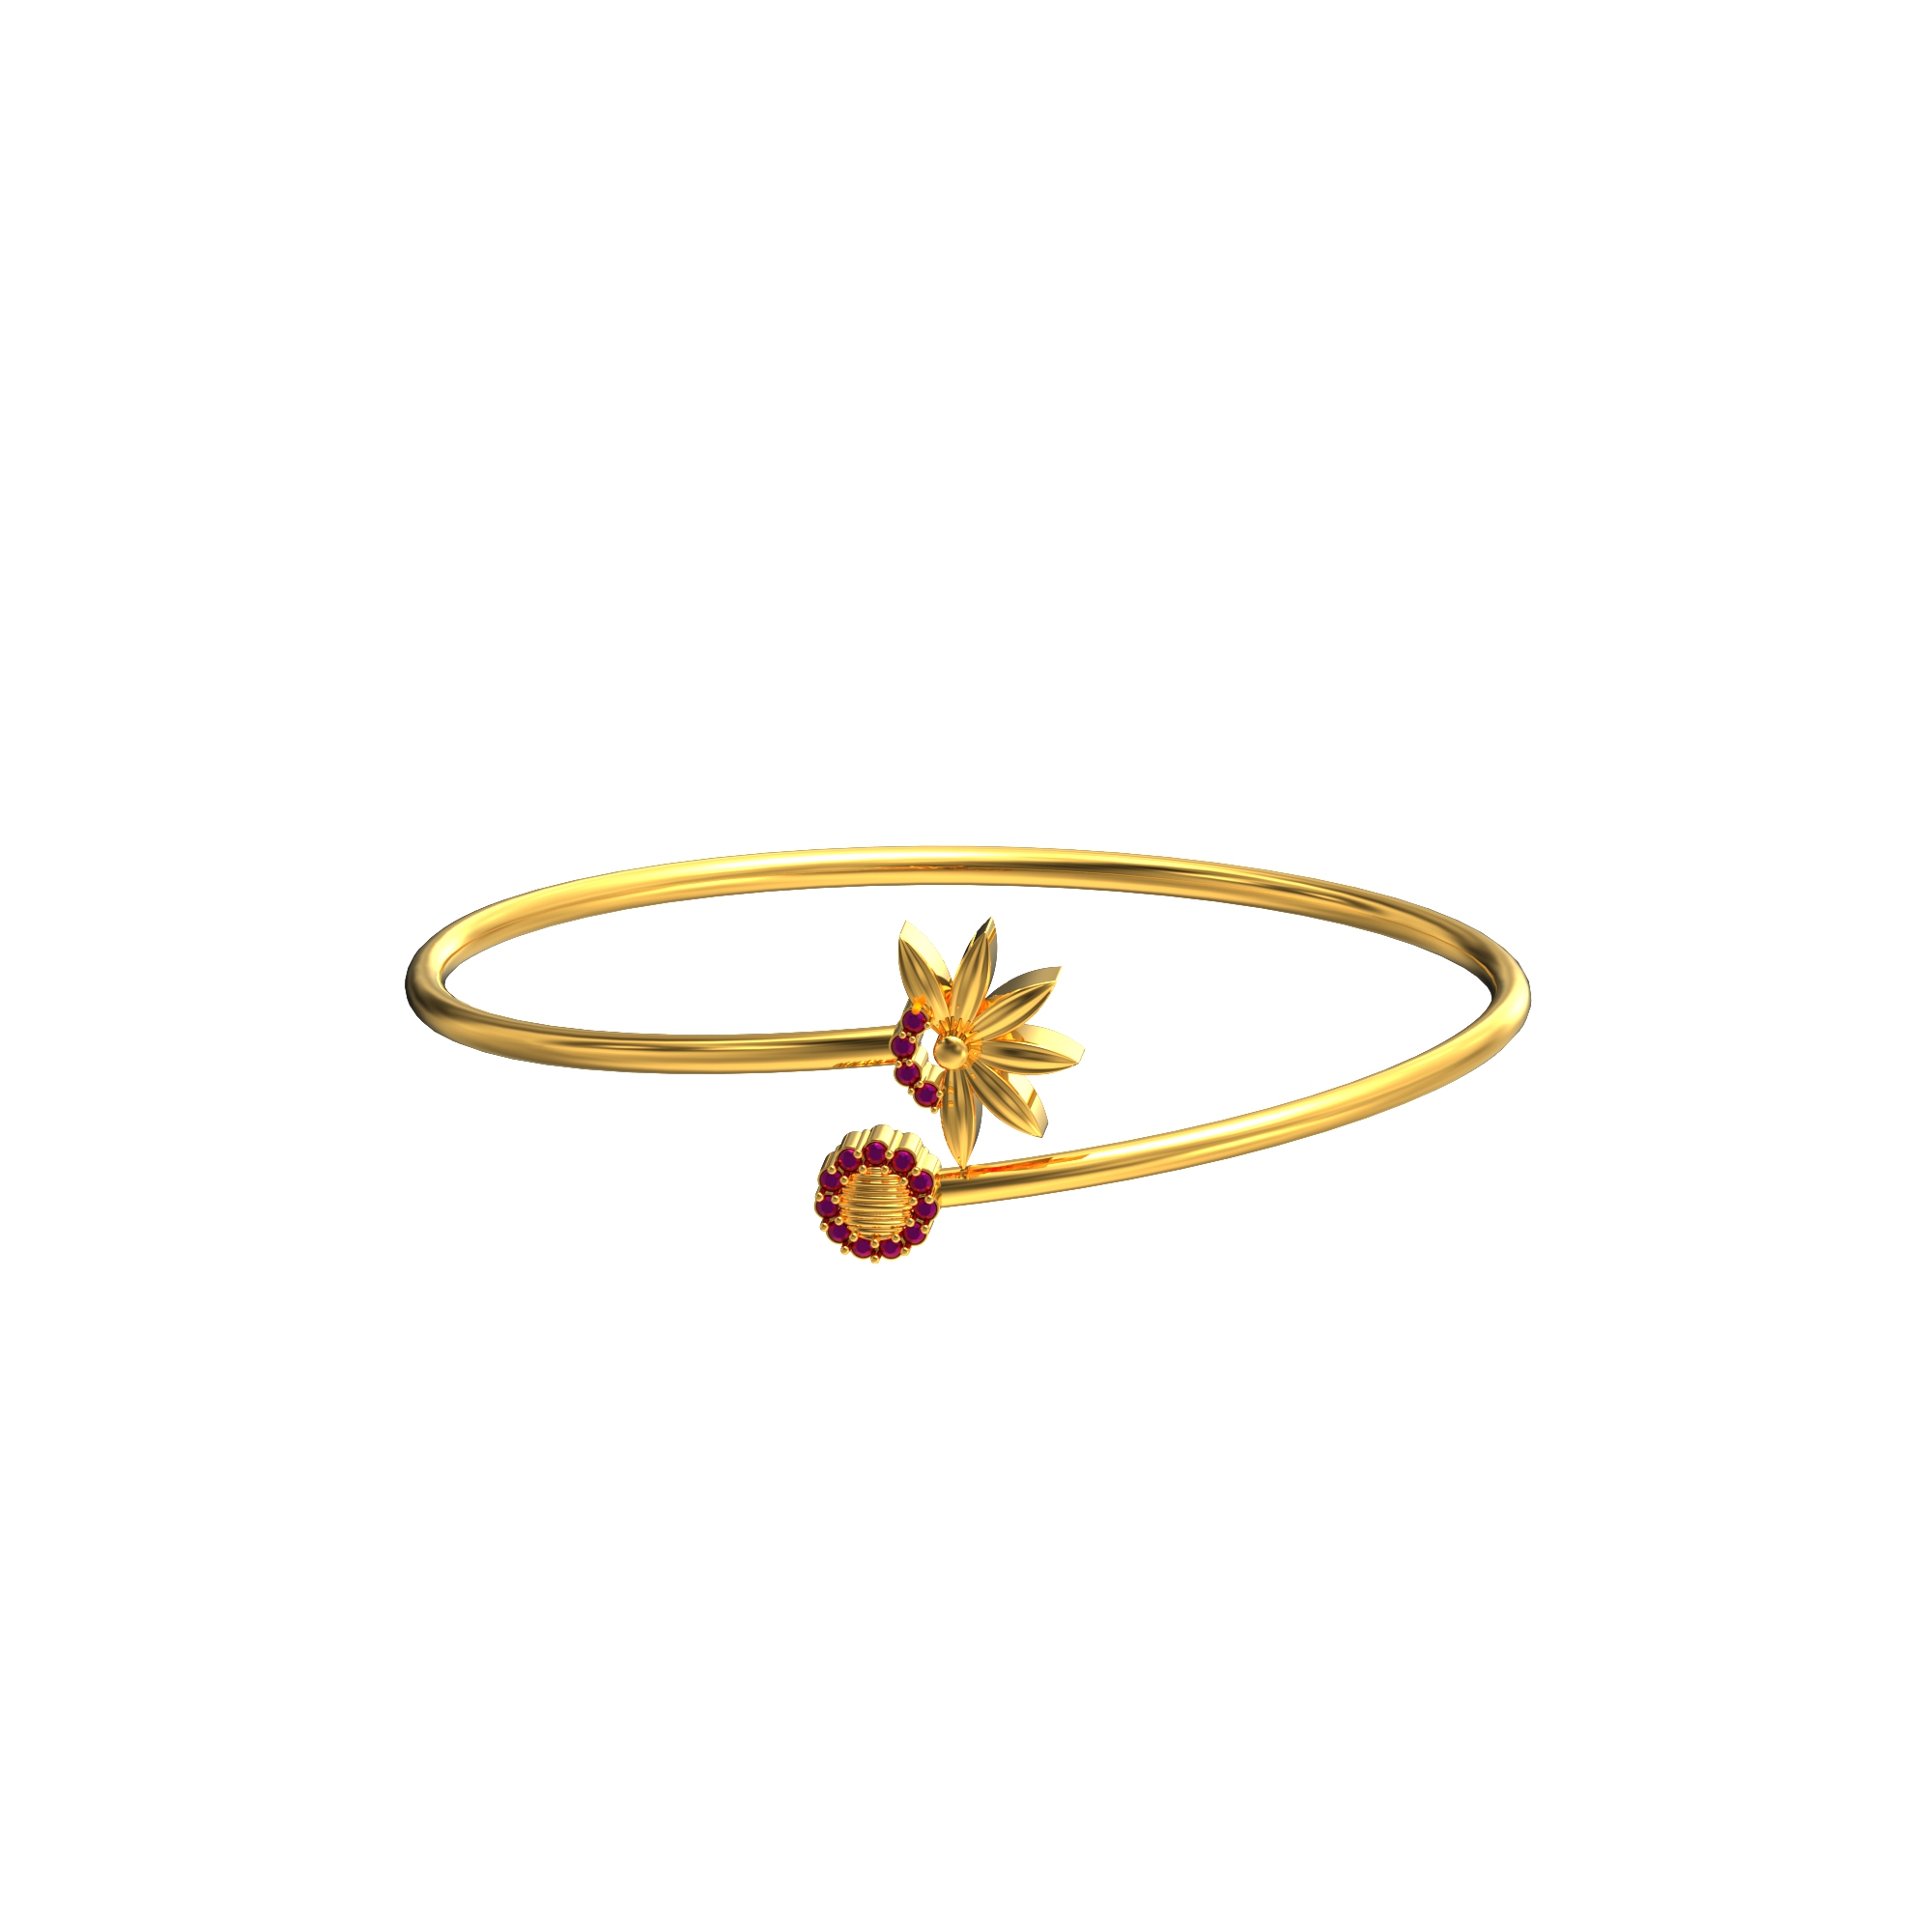 Gold Bracelet with Flowers At The End